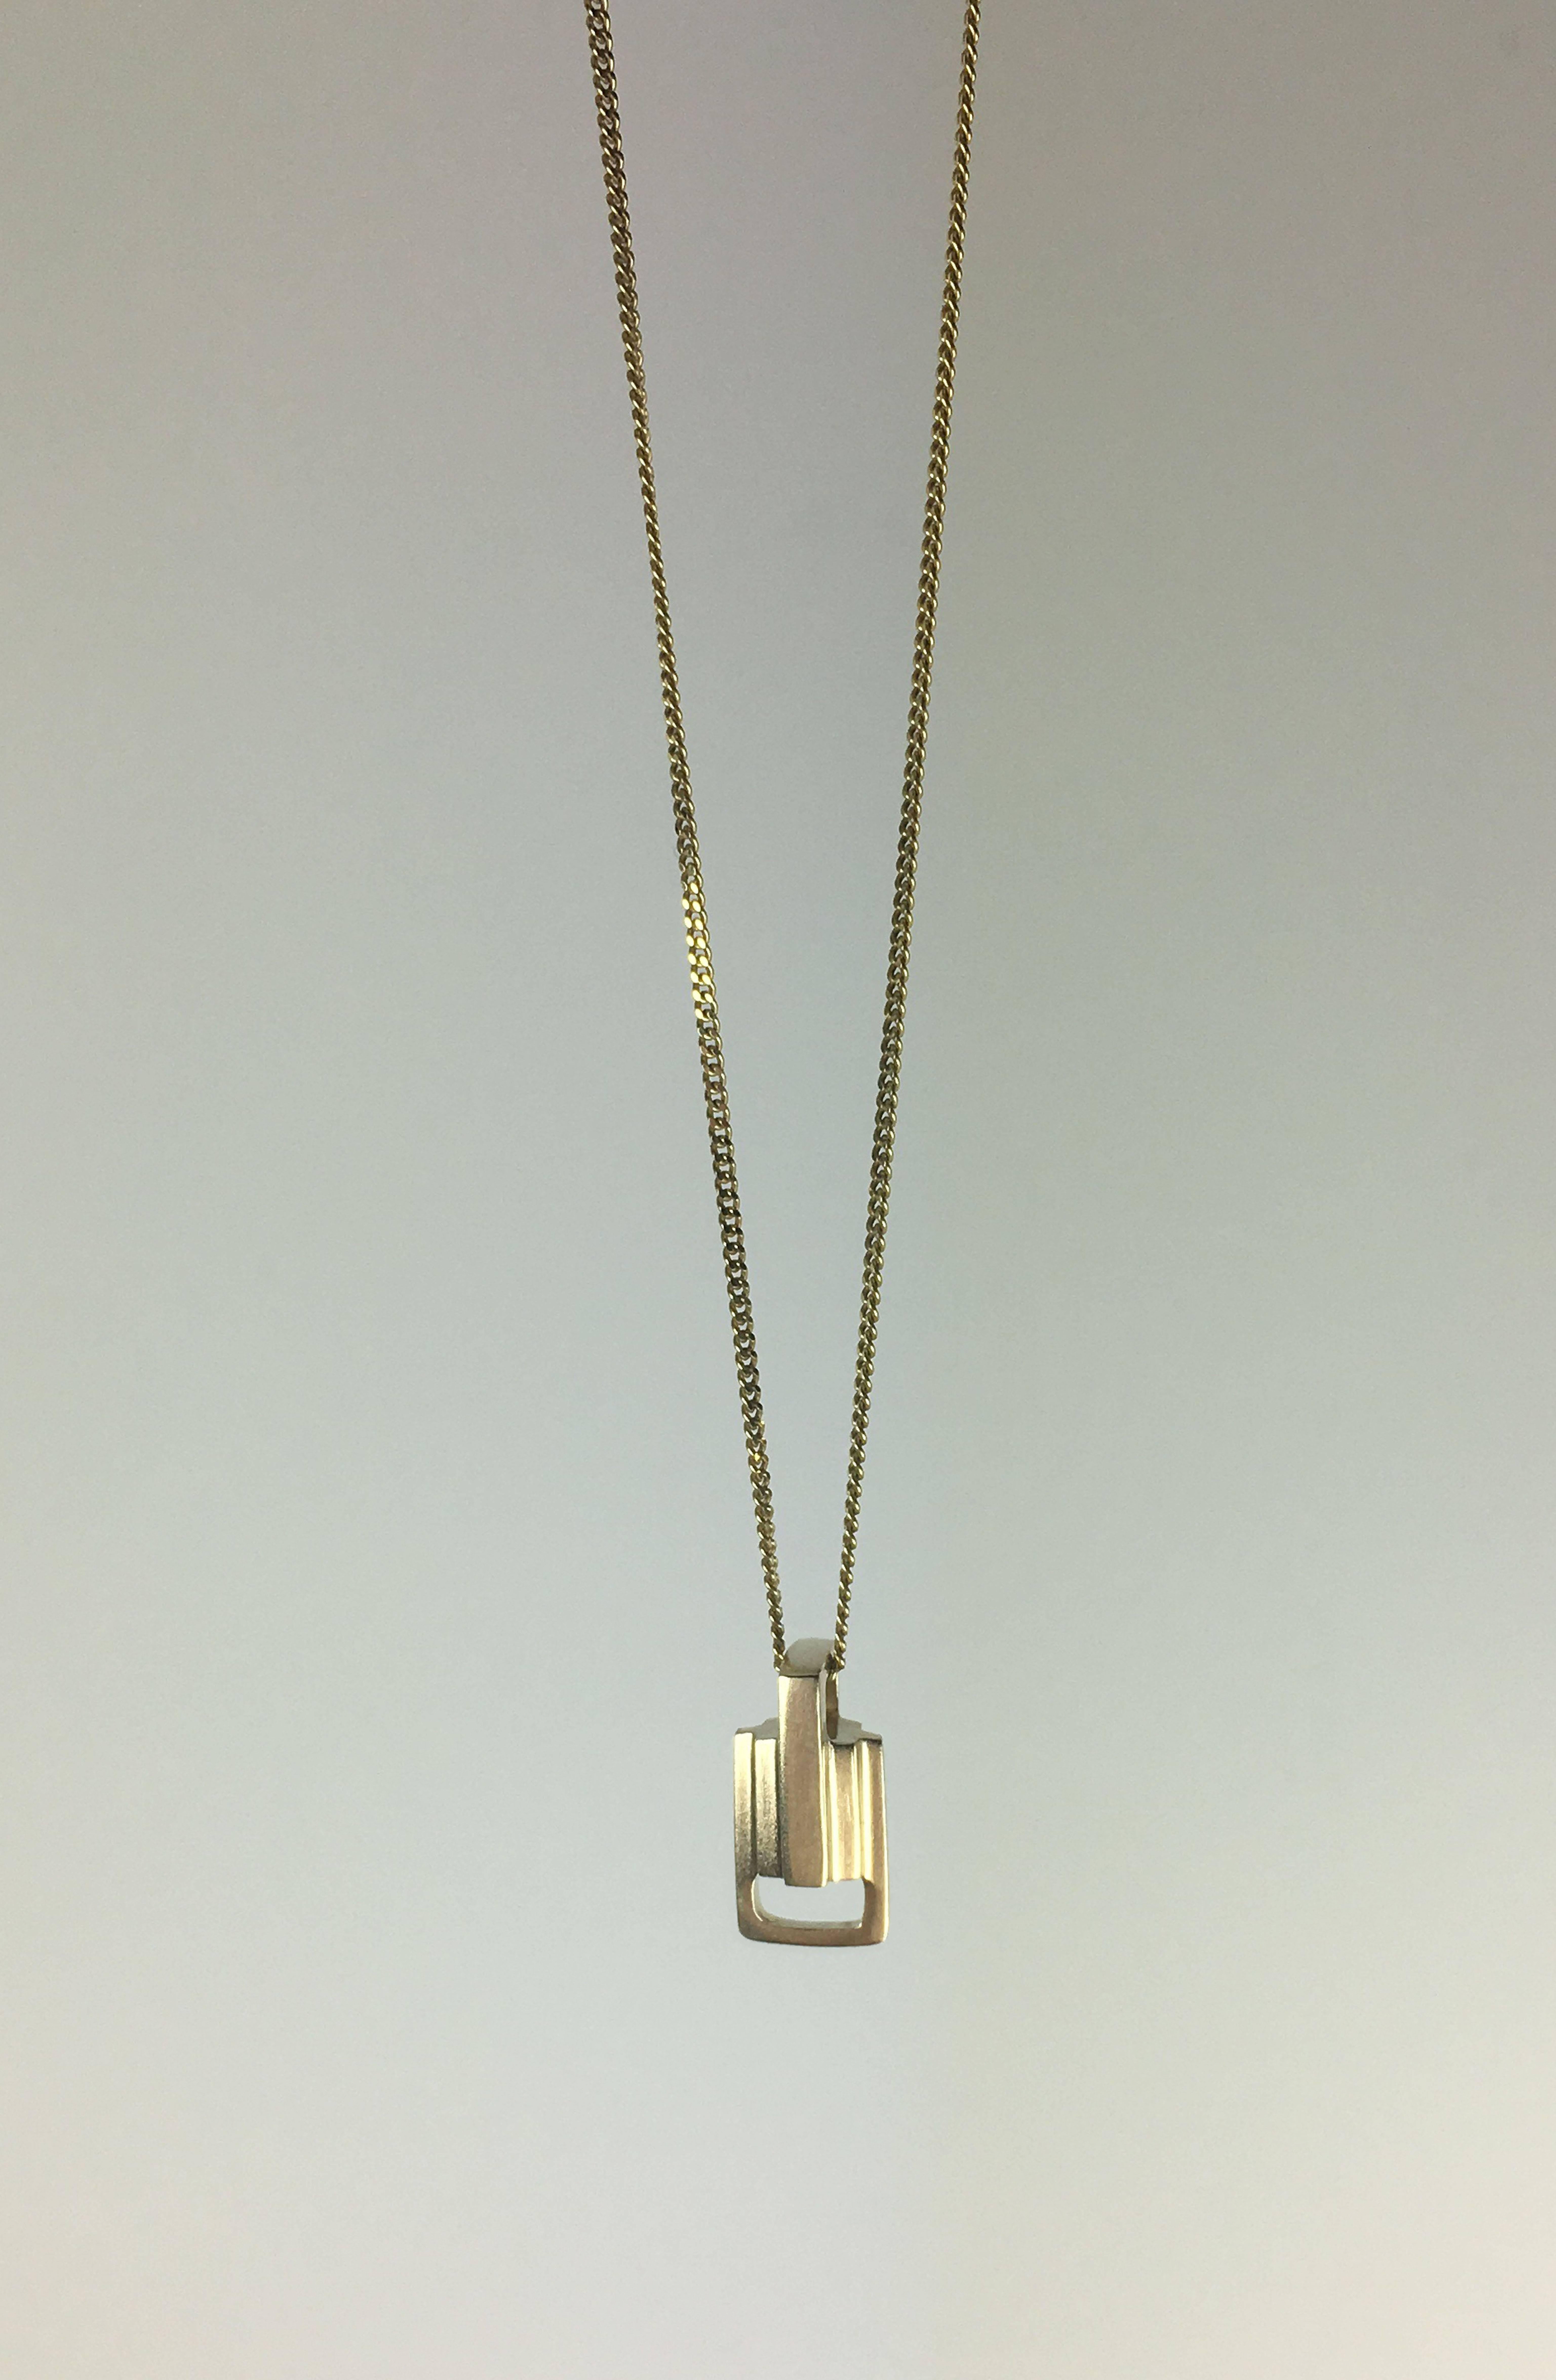 Influenced by the Art Deco style, this elegant 18 karat gold link pendant is classy, architectural and angular. With the steps design, its beauty is in the detail. On an elegant 18 inch gold chain.

Designed and created in Dublin, Ireland. Handling